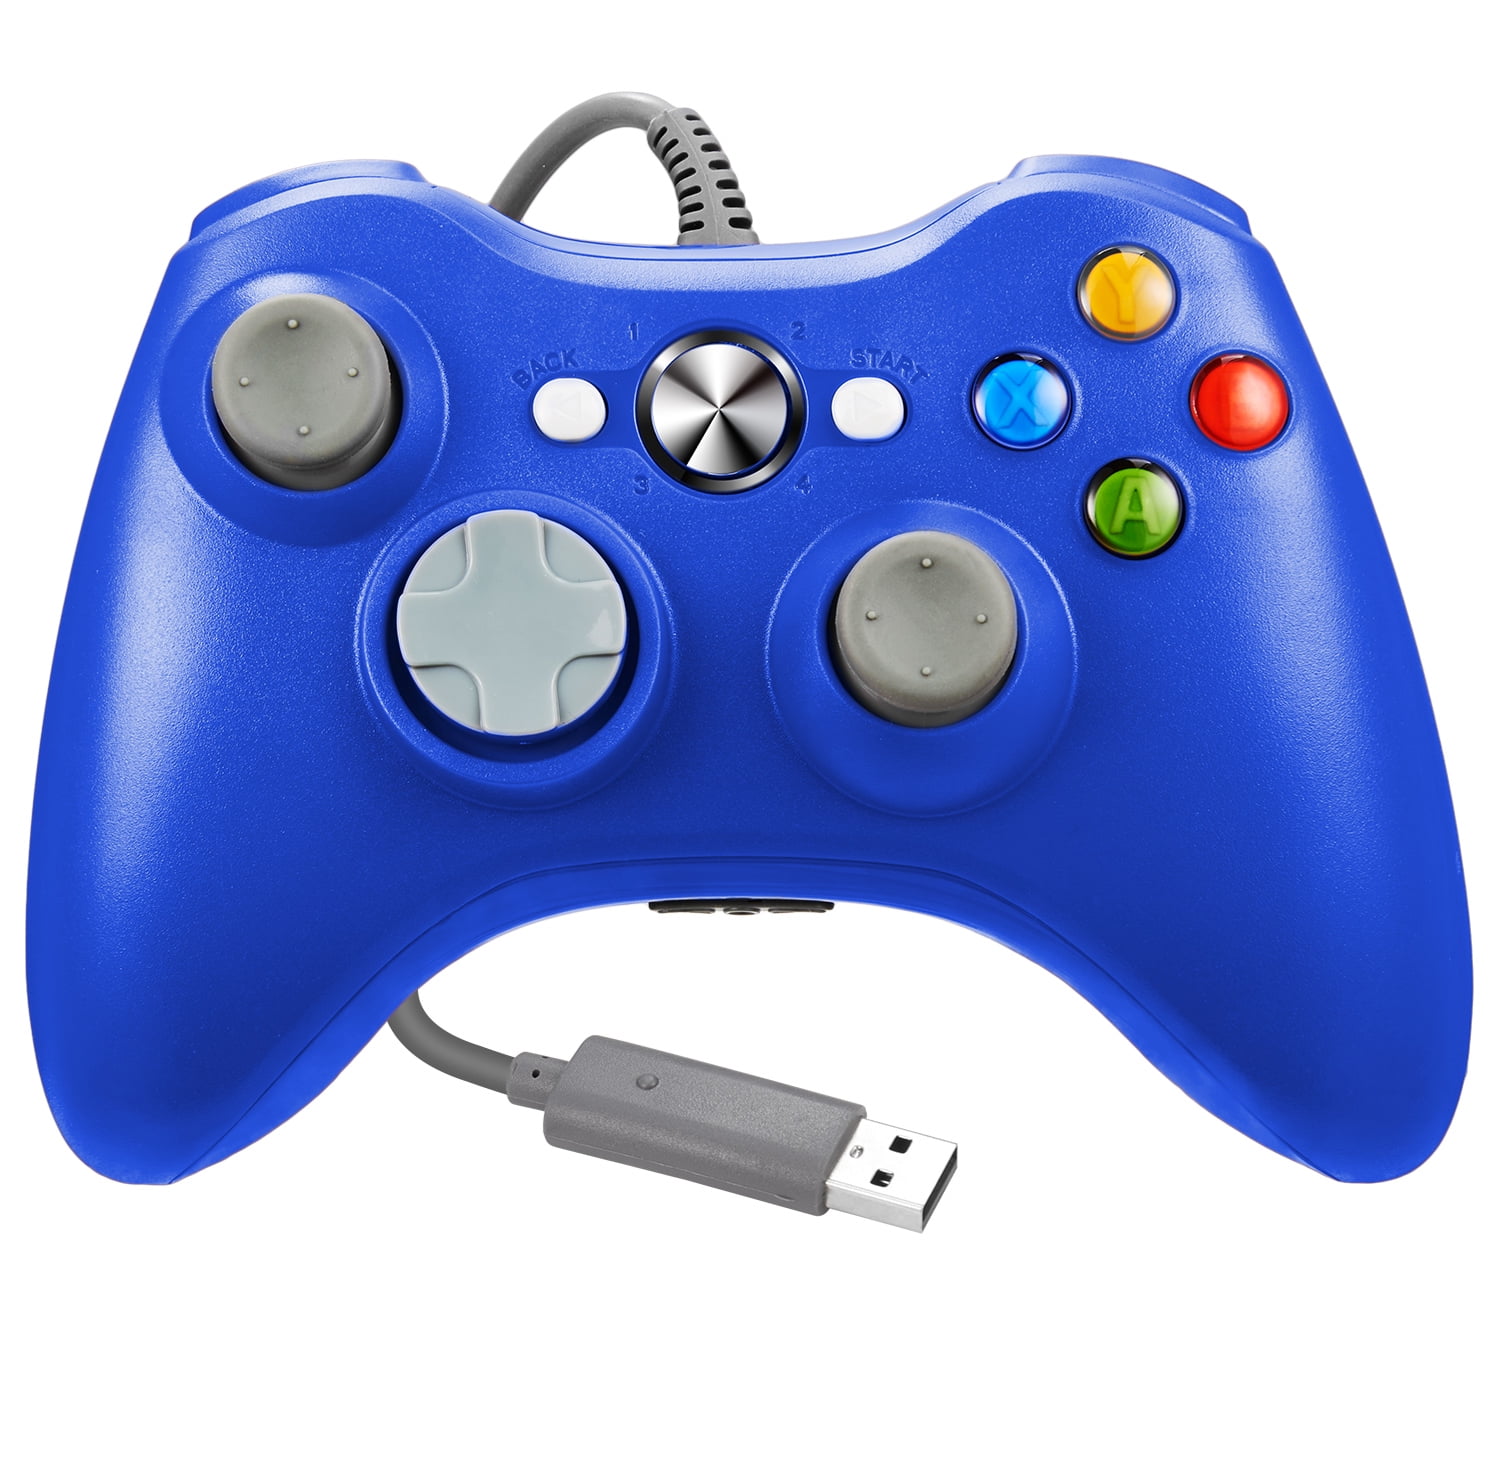 Spanje avontuur Bedankt LUXMO Xbox 360 Wired Controller with Shoulders Buttons for Microsoft Xbox  360/Xbox 360 Slim/PC Windows 7 8 10 Game (Blue) - Walmart.com